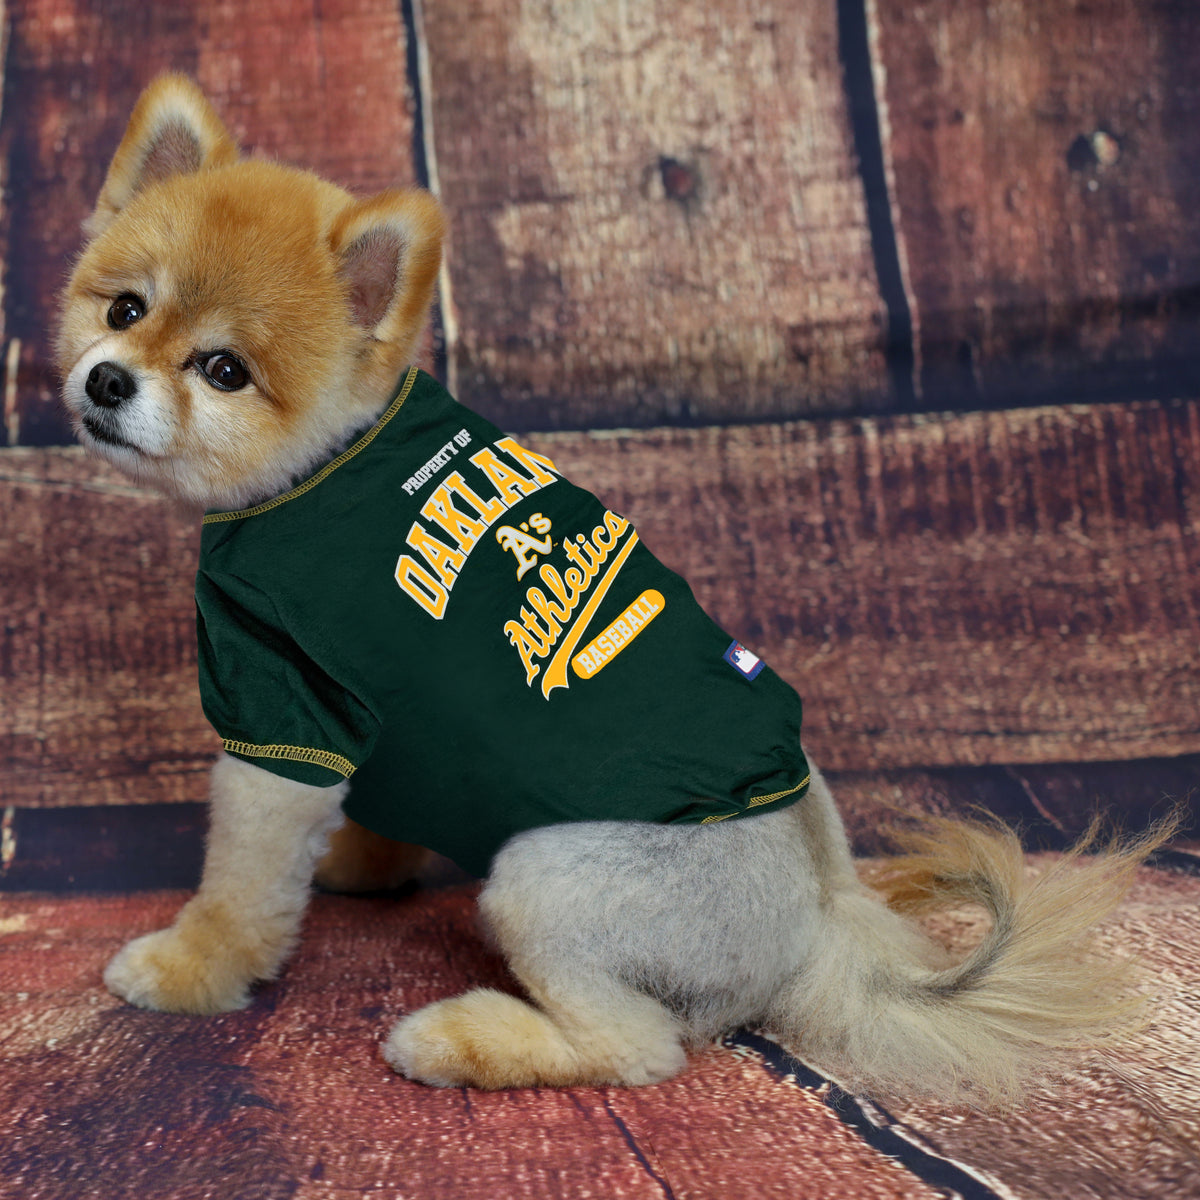 Oakland Athletics Apparel, A's Jersey, A's Clothing and Gear